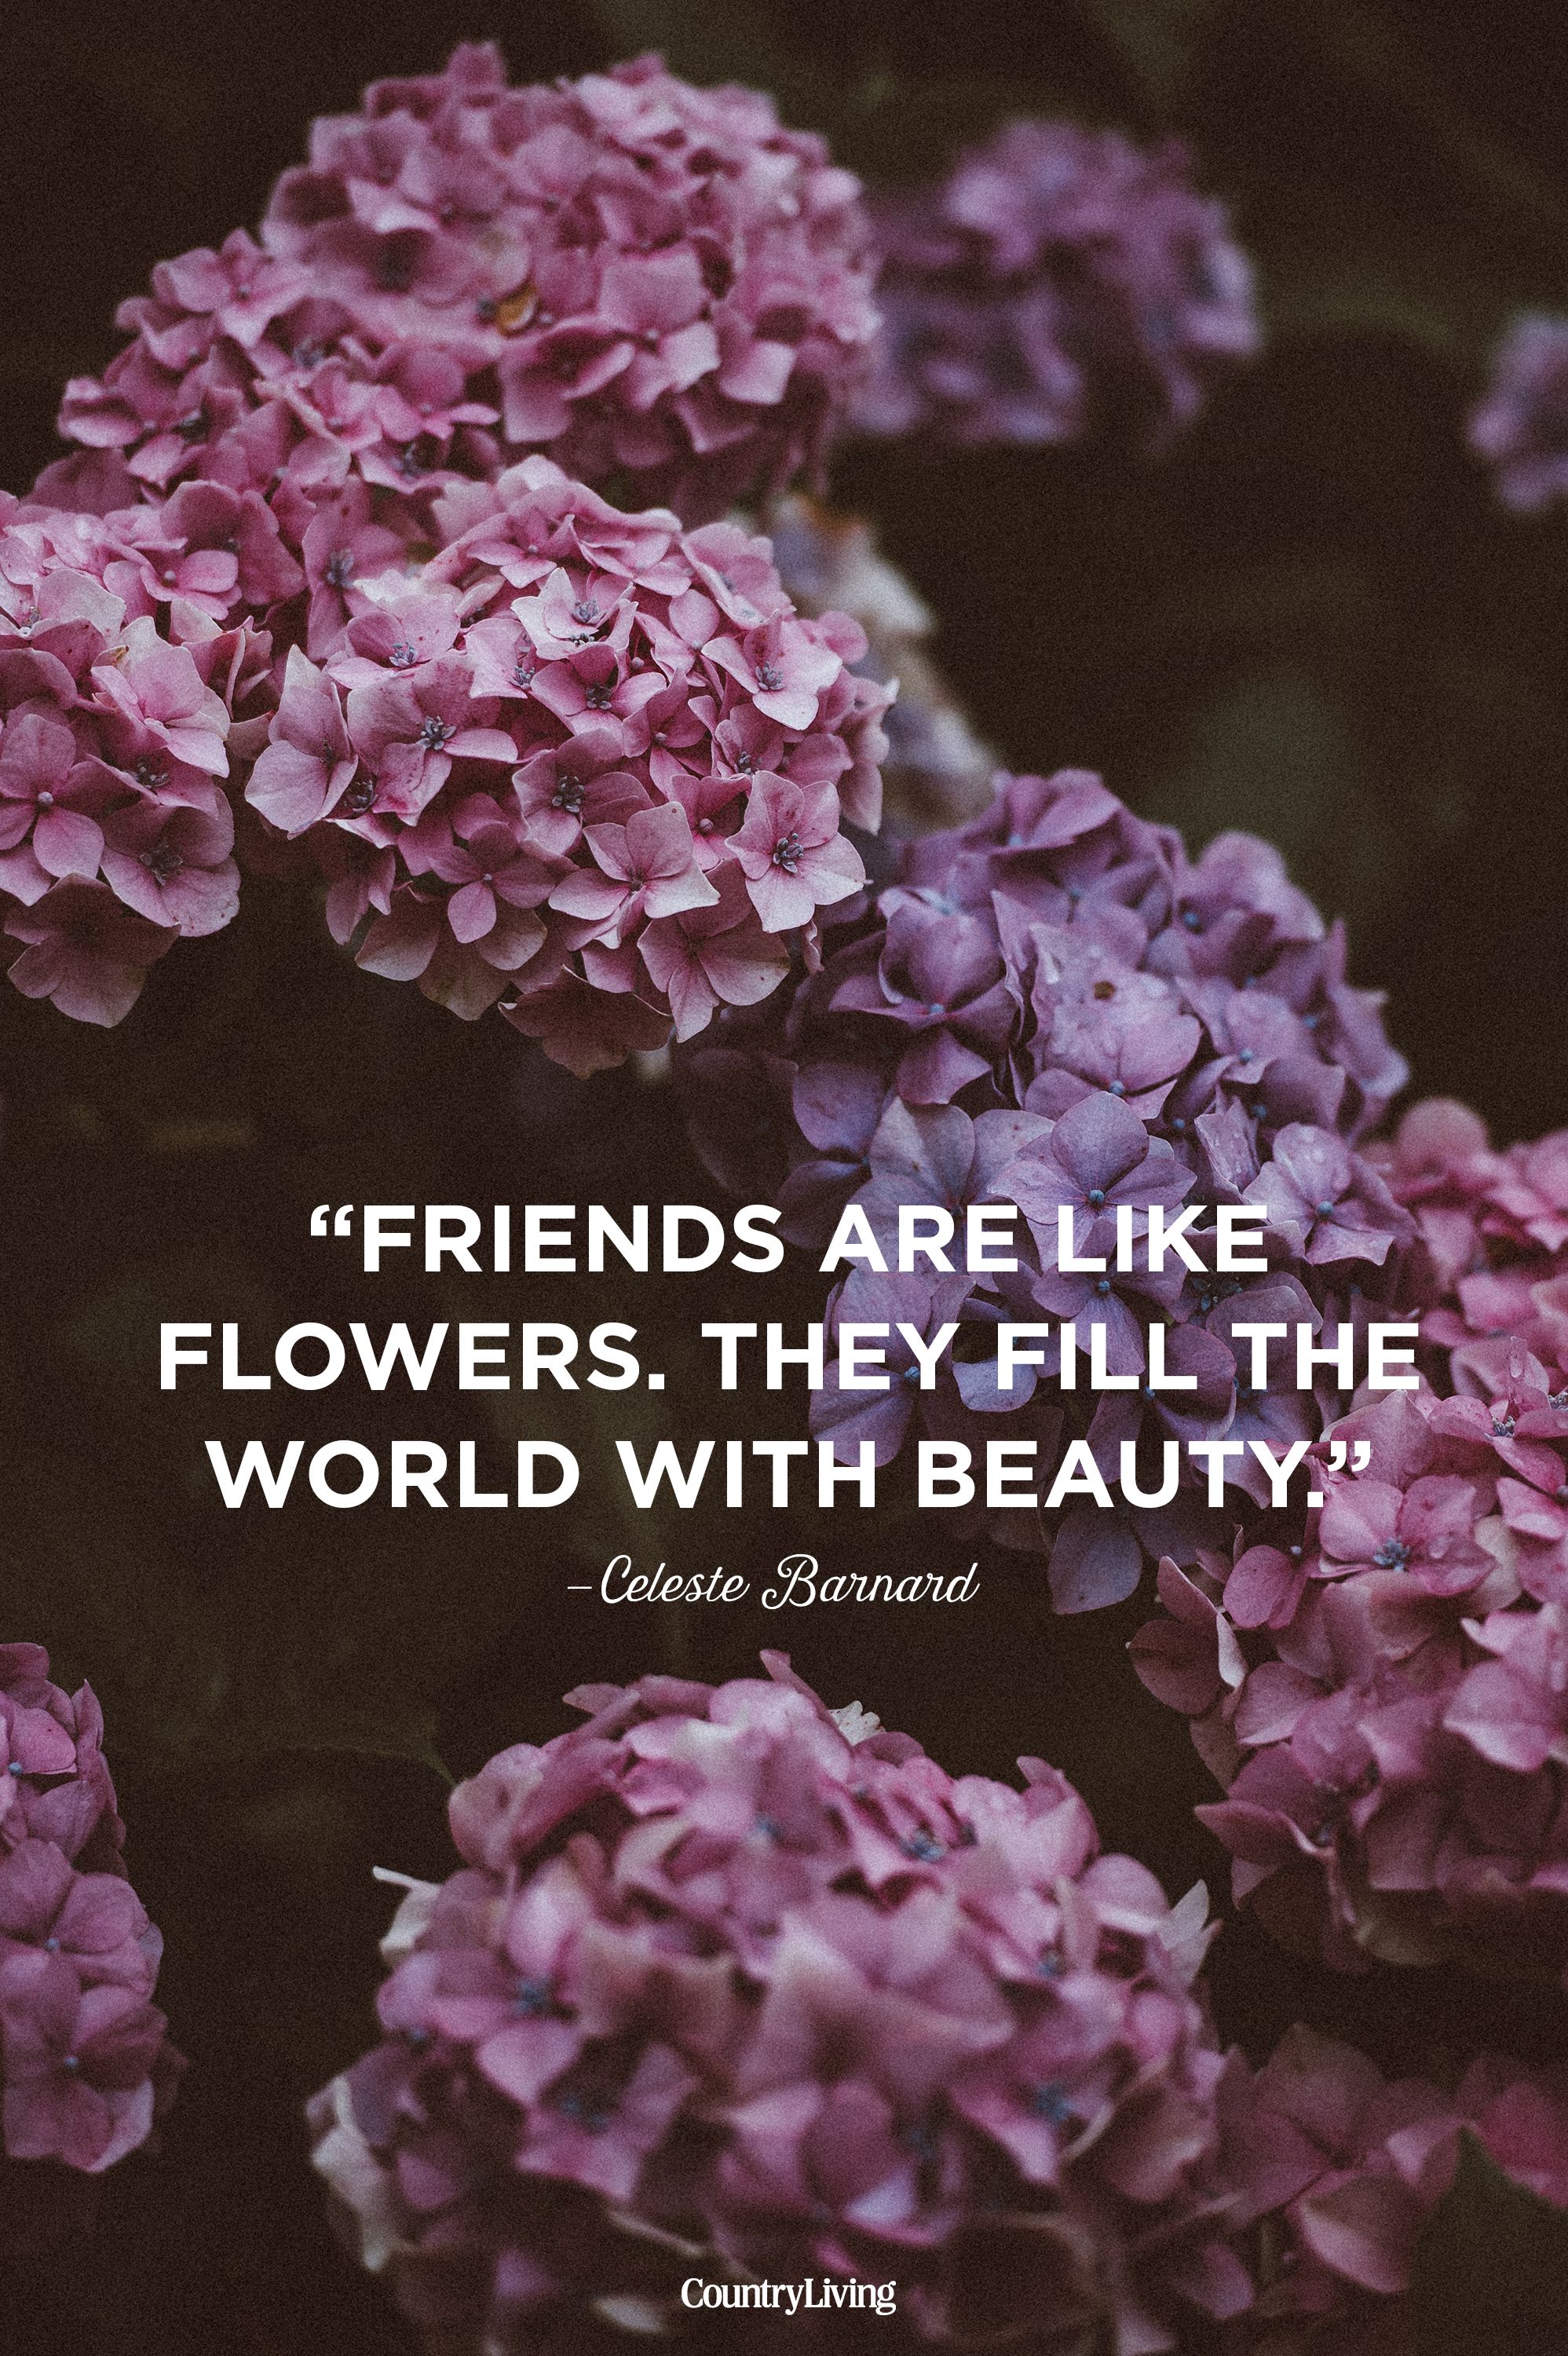 10 Cute Friendship Quotes - Short Sayings About Friendship